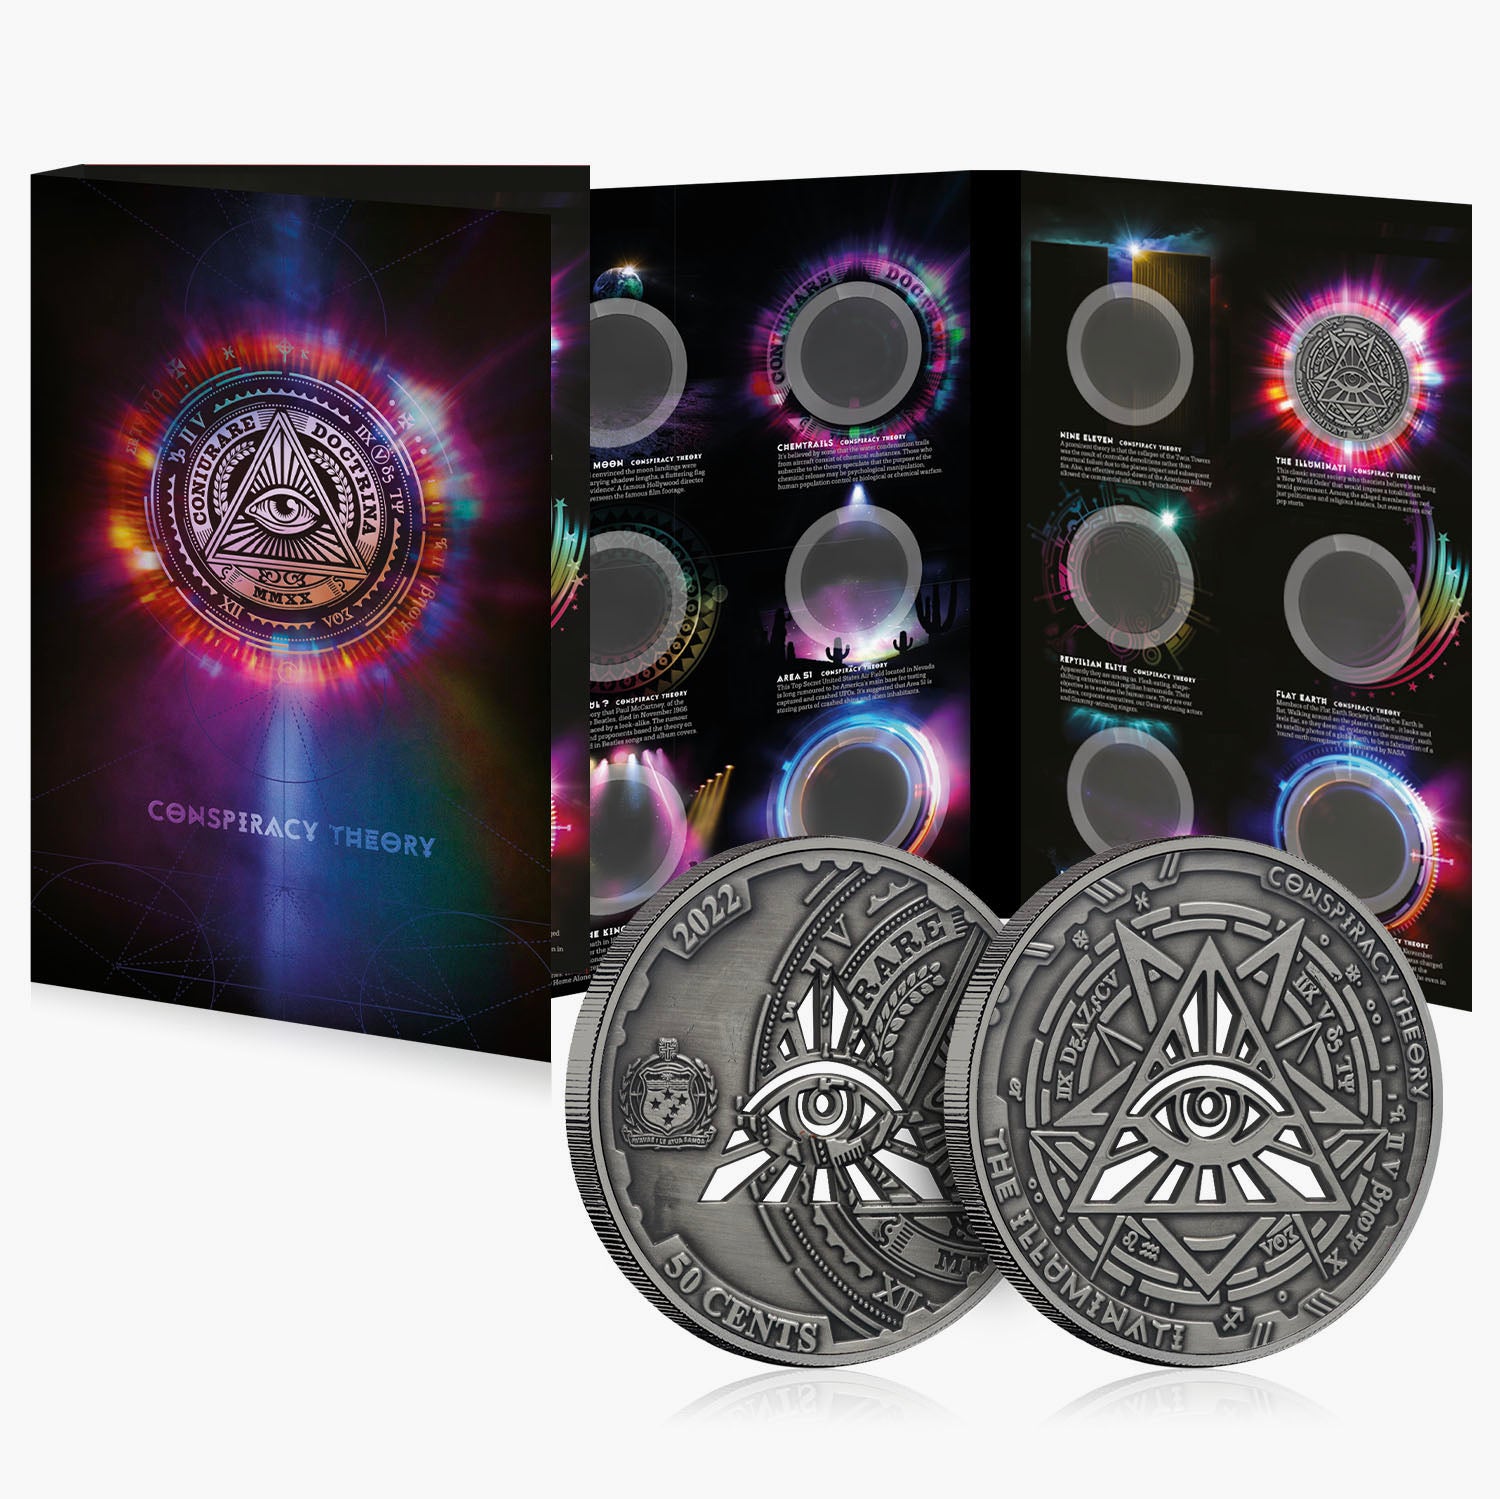 The Conspiracy Theory Coin Collection